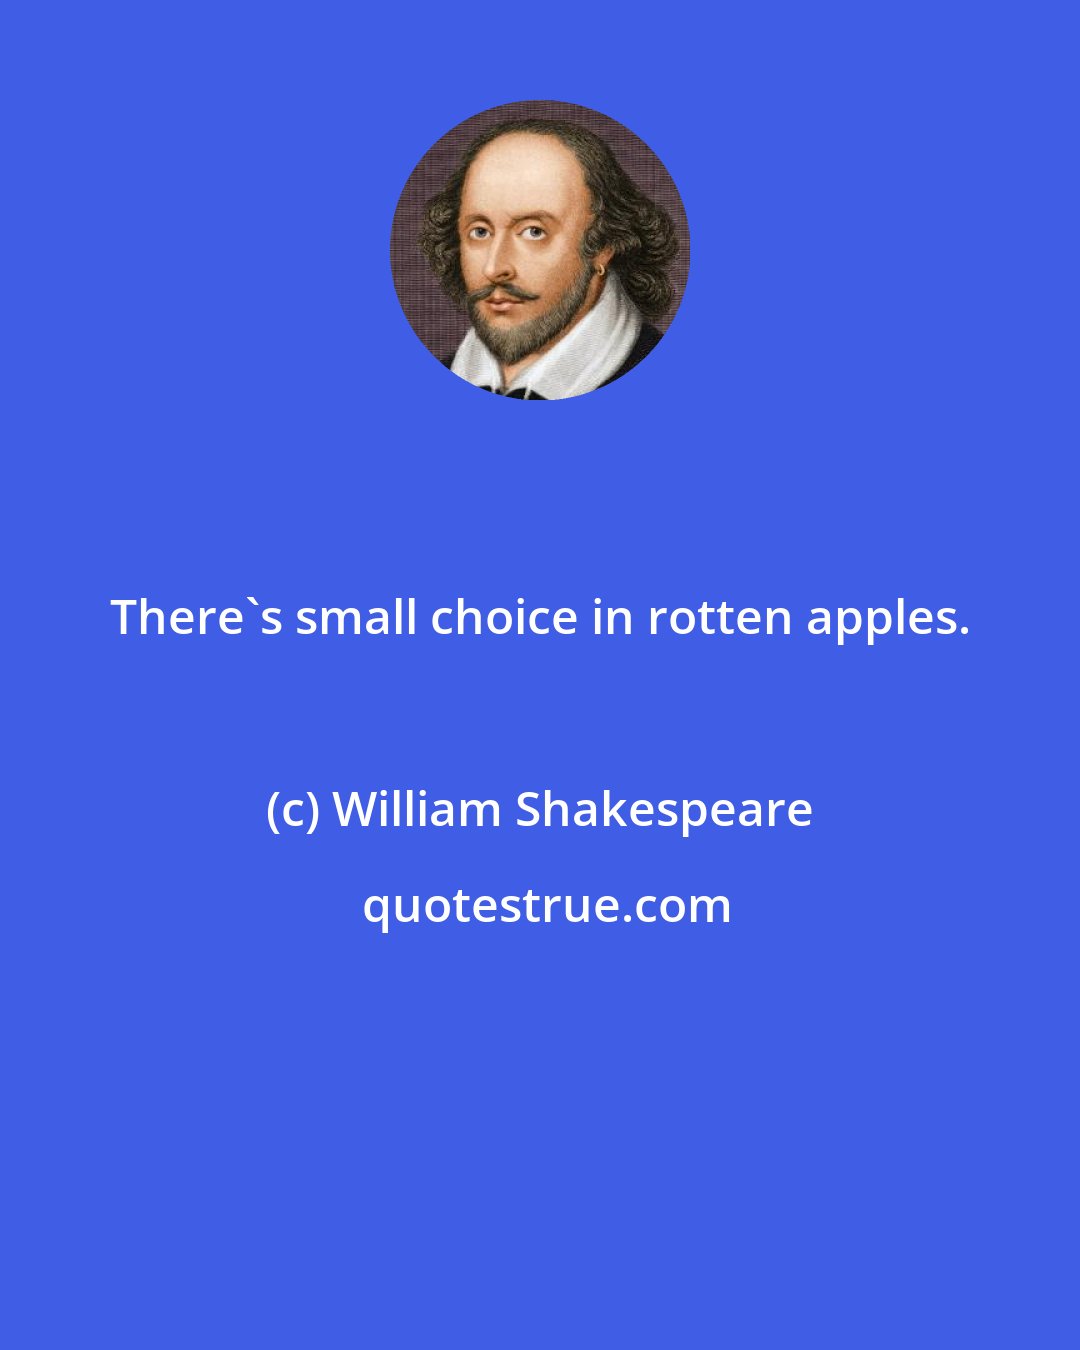 William Shakespeare: There's small choice in rotten apples.